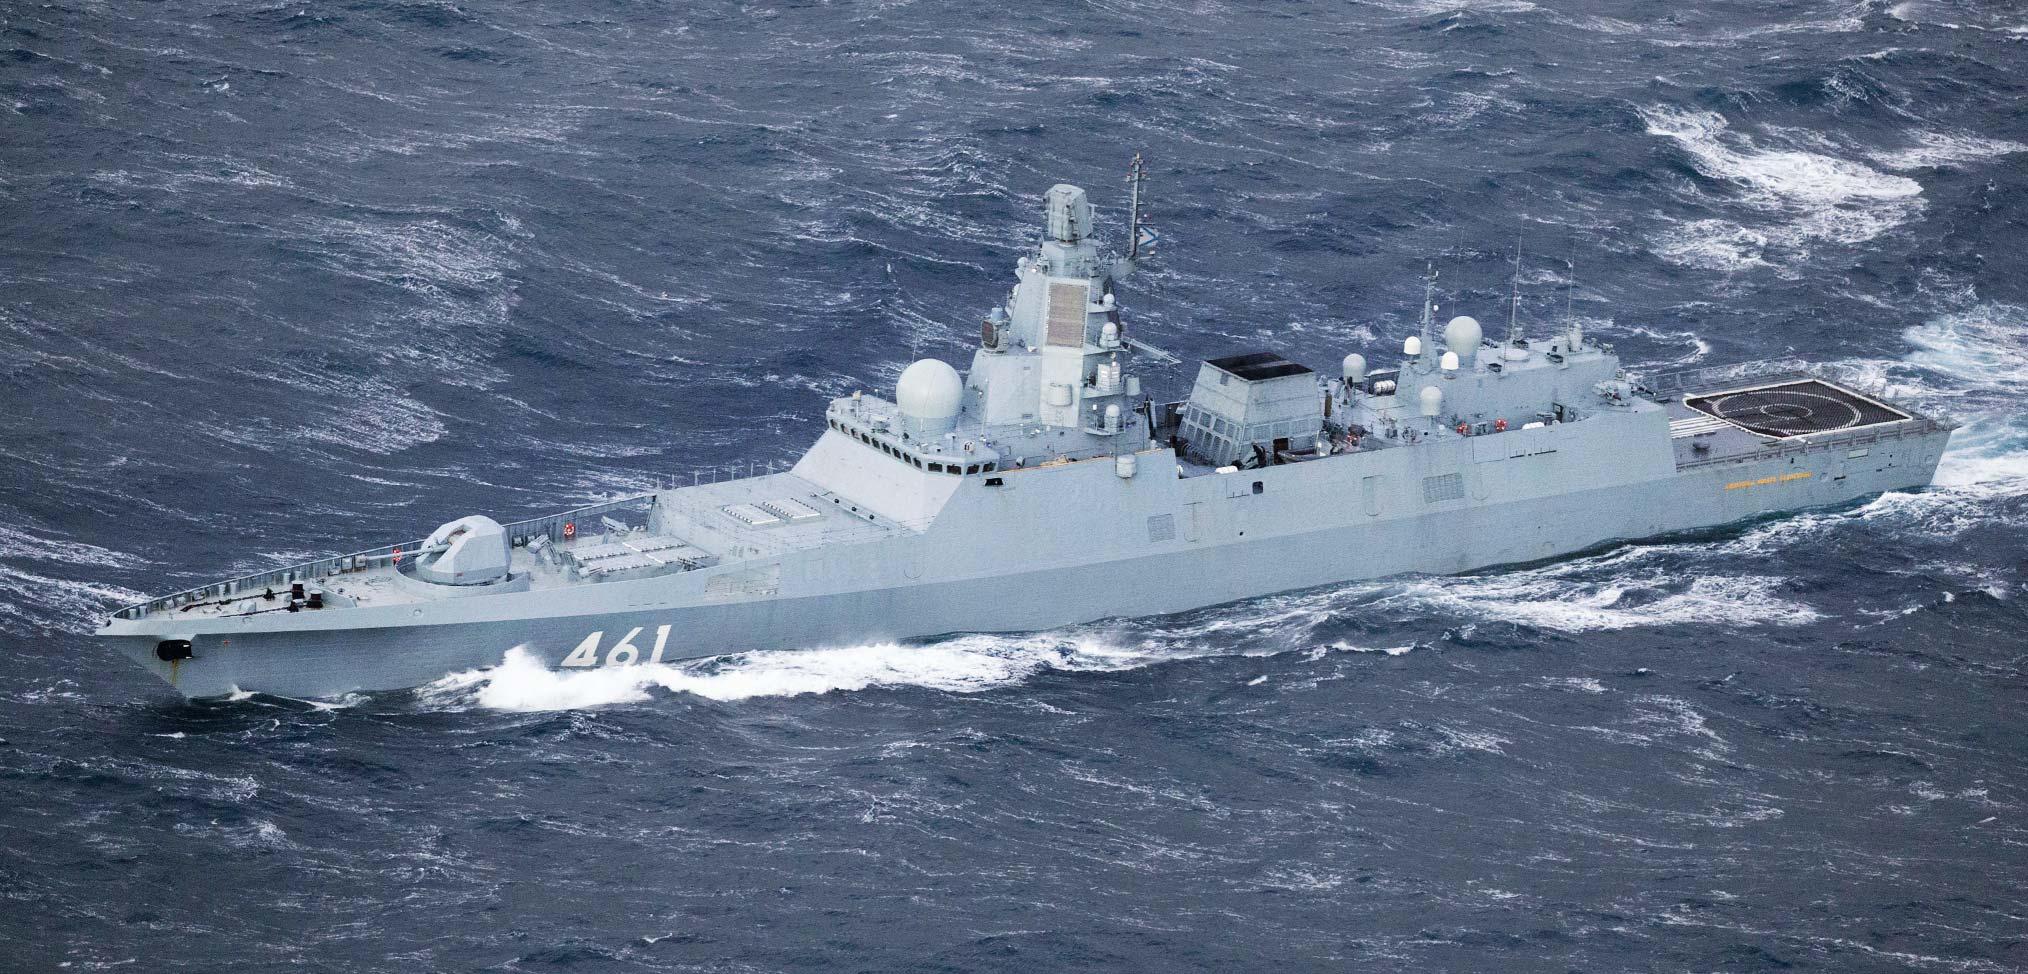 Russian Navy adds to pressure on Ukraine and NATO